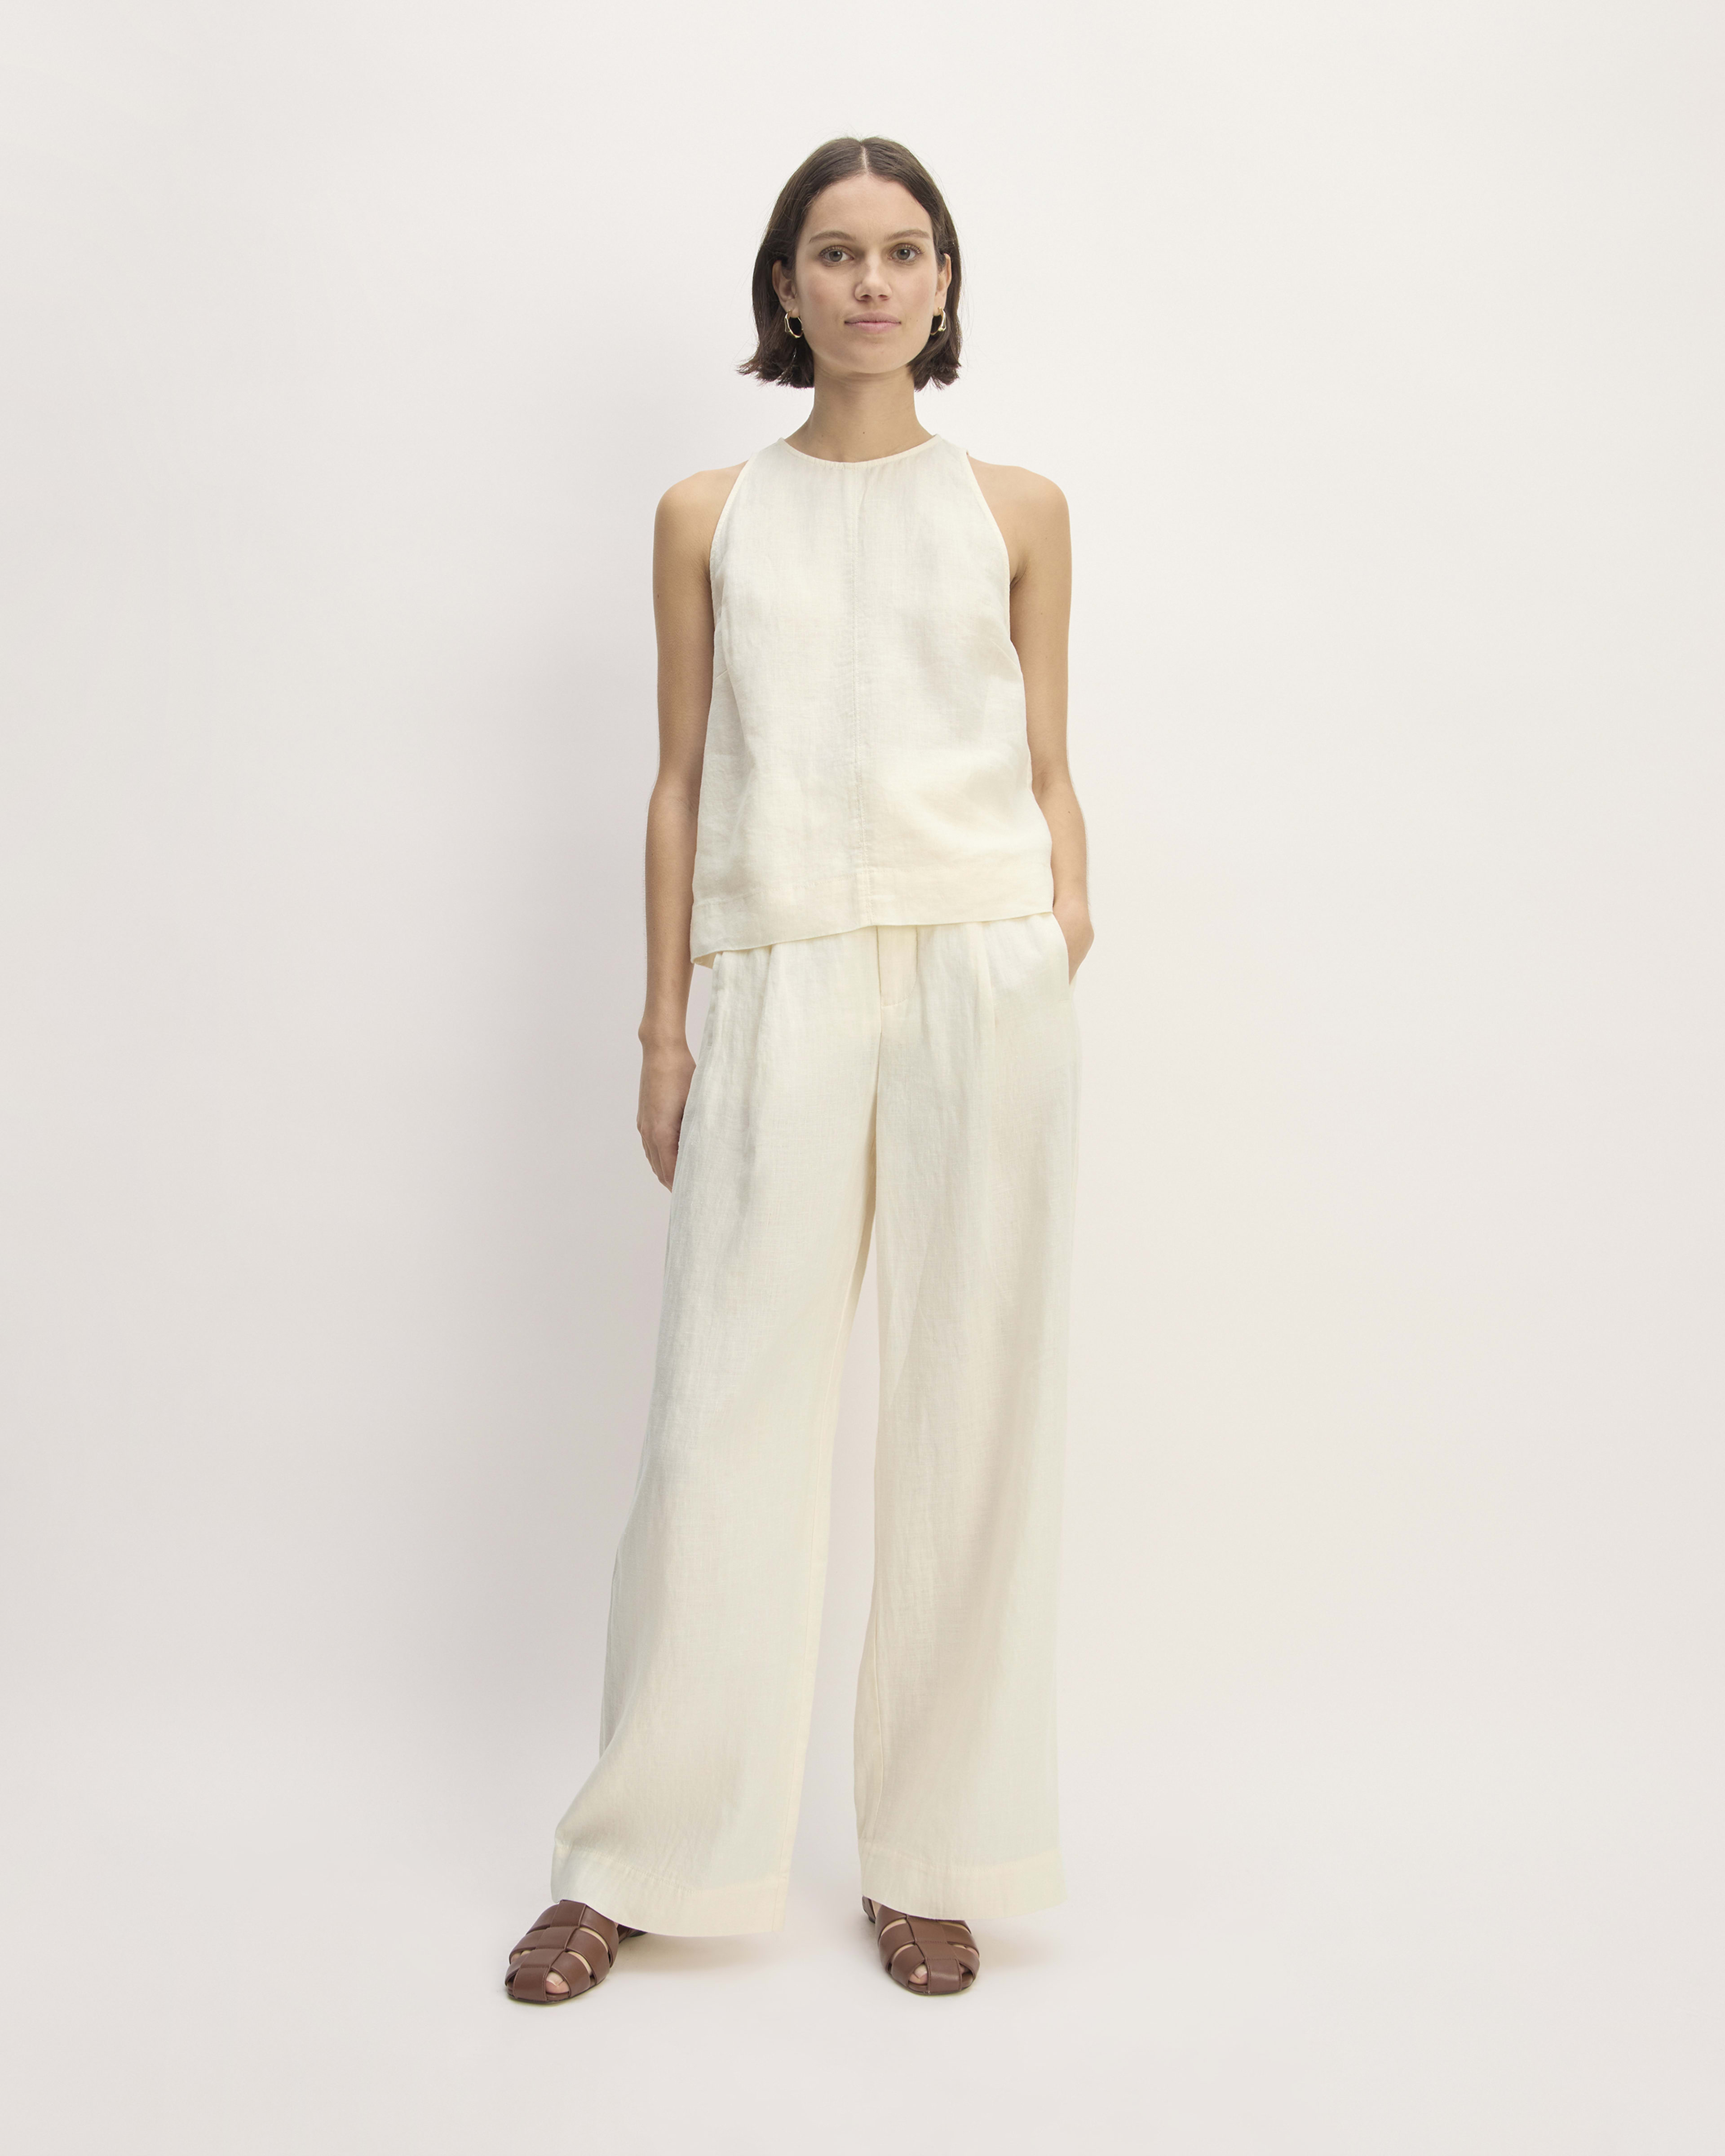 a model wears a white tank top and matching linen trousers